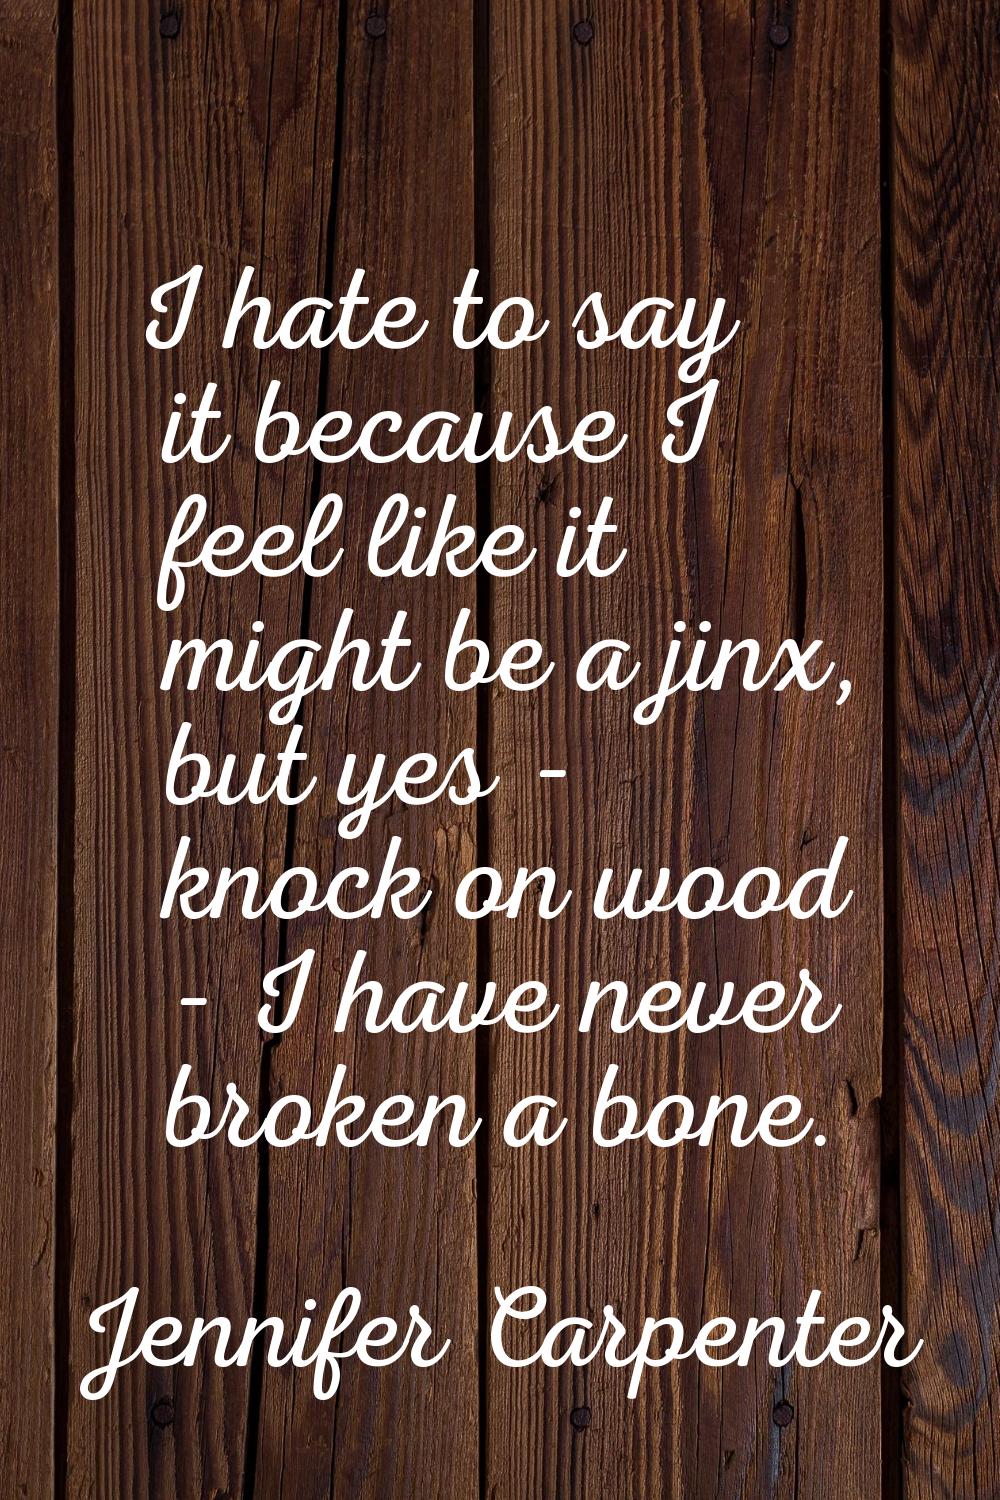 I hate to say it because I feel like it might be a jinx, but yes - knock on wood - I have never bro